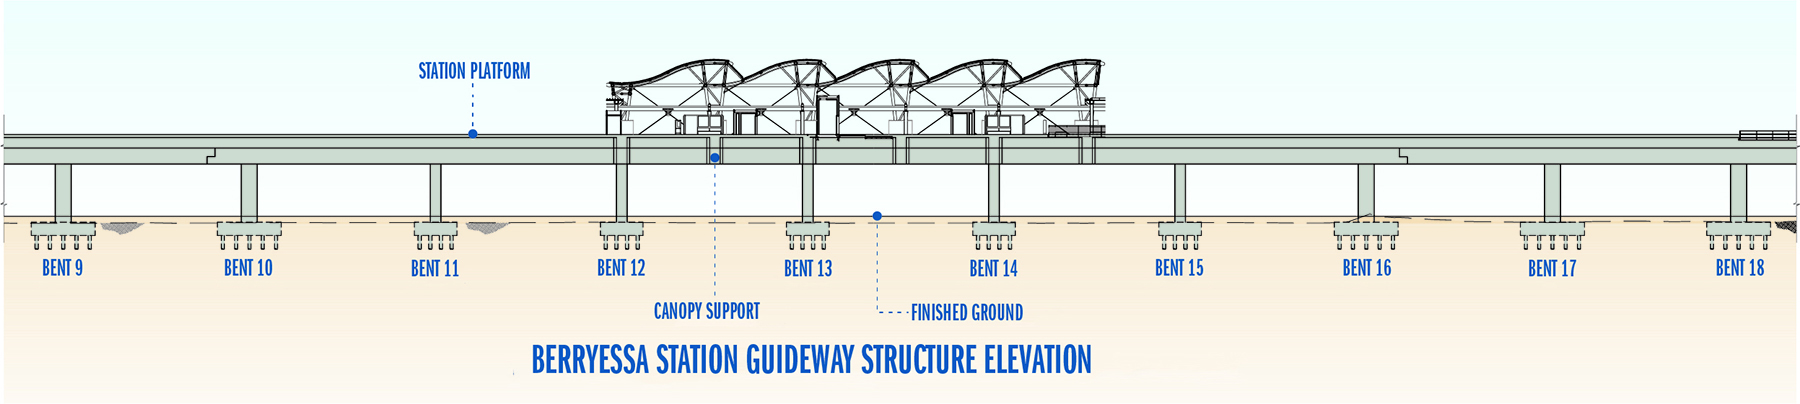 rendering of the Berryessa station guideway structure